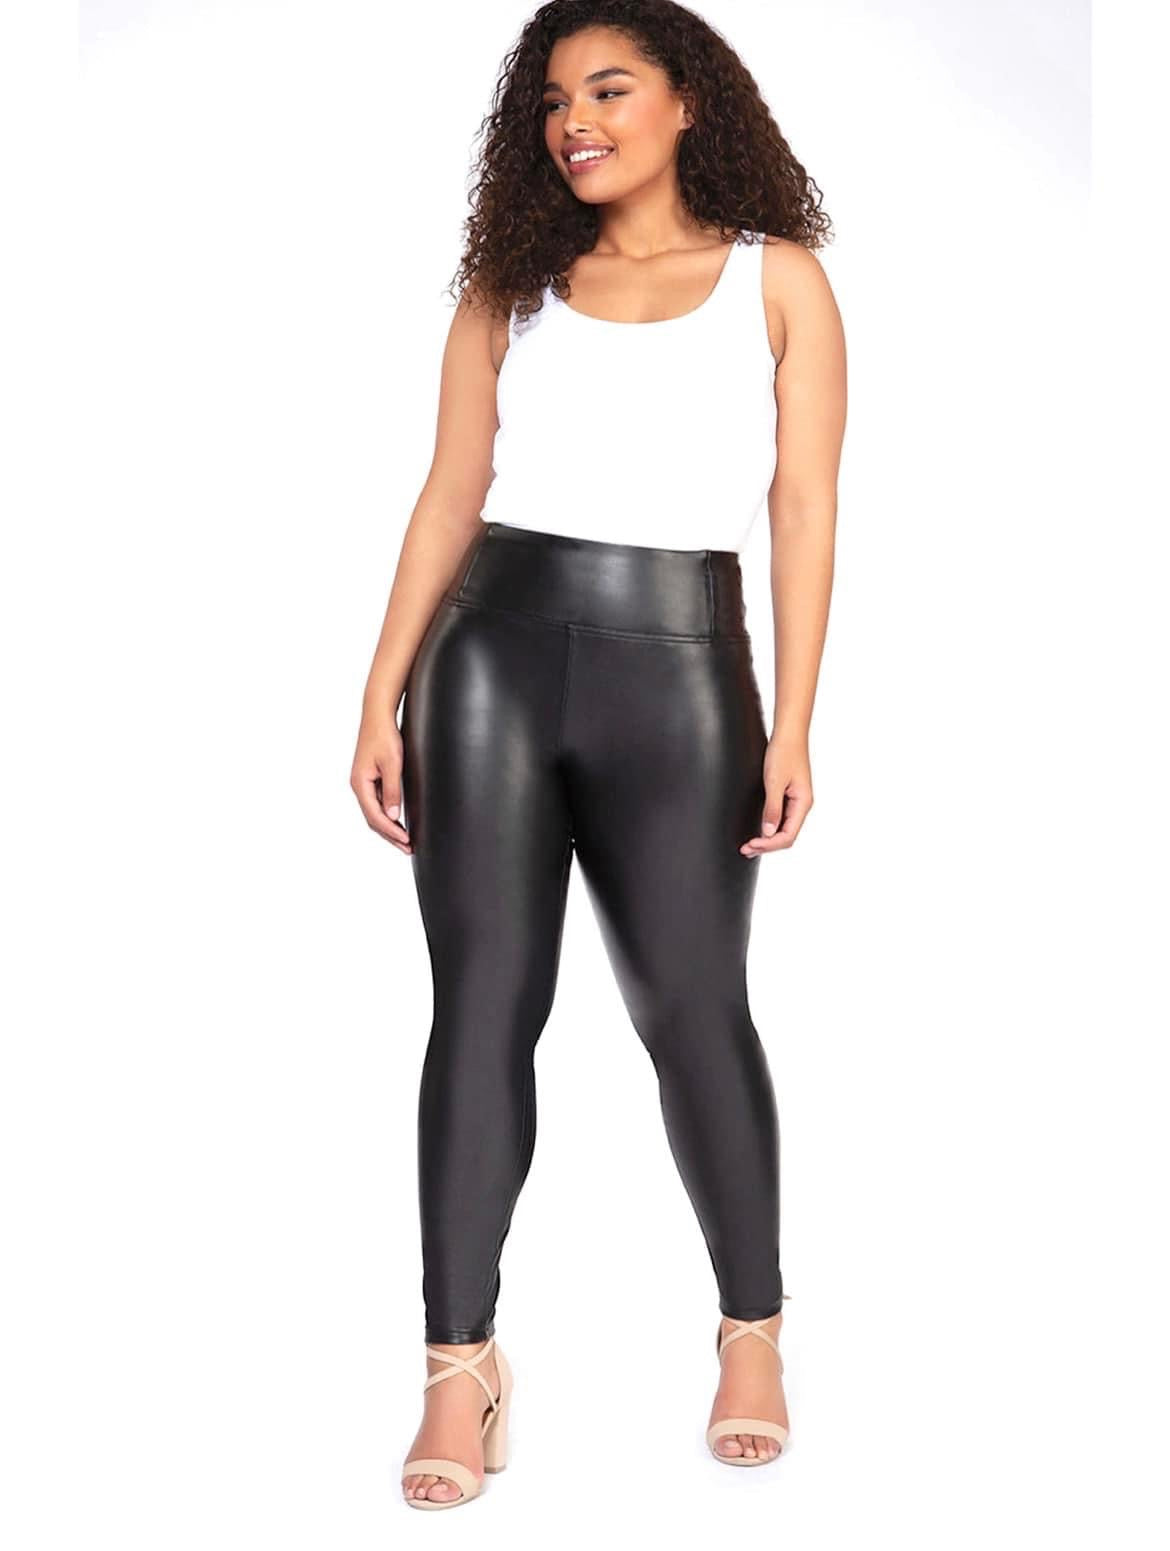 Leather Look High Waisted Leggings--Black, 41% OFF